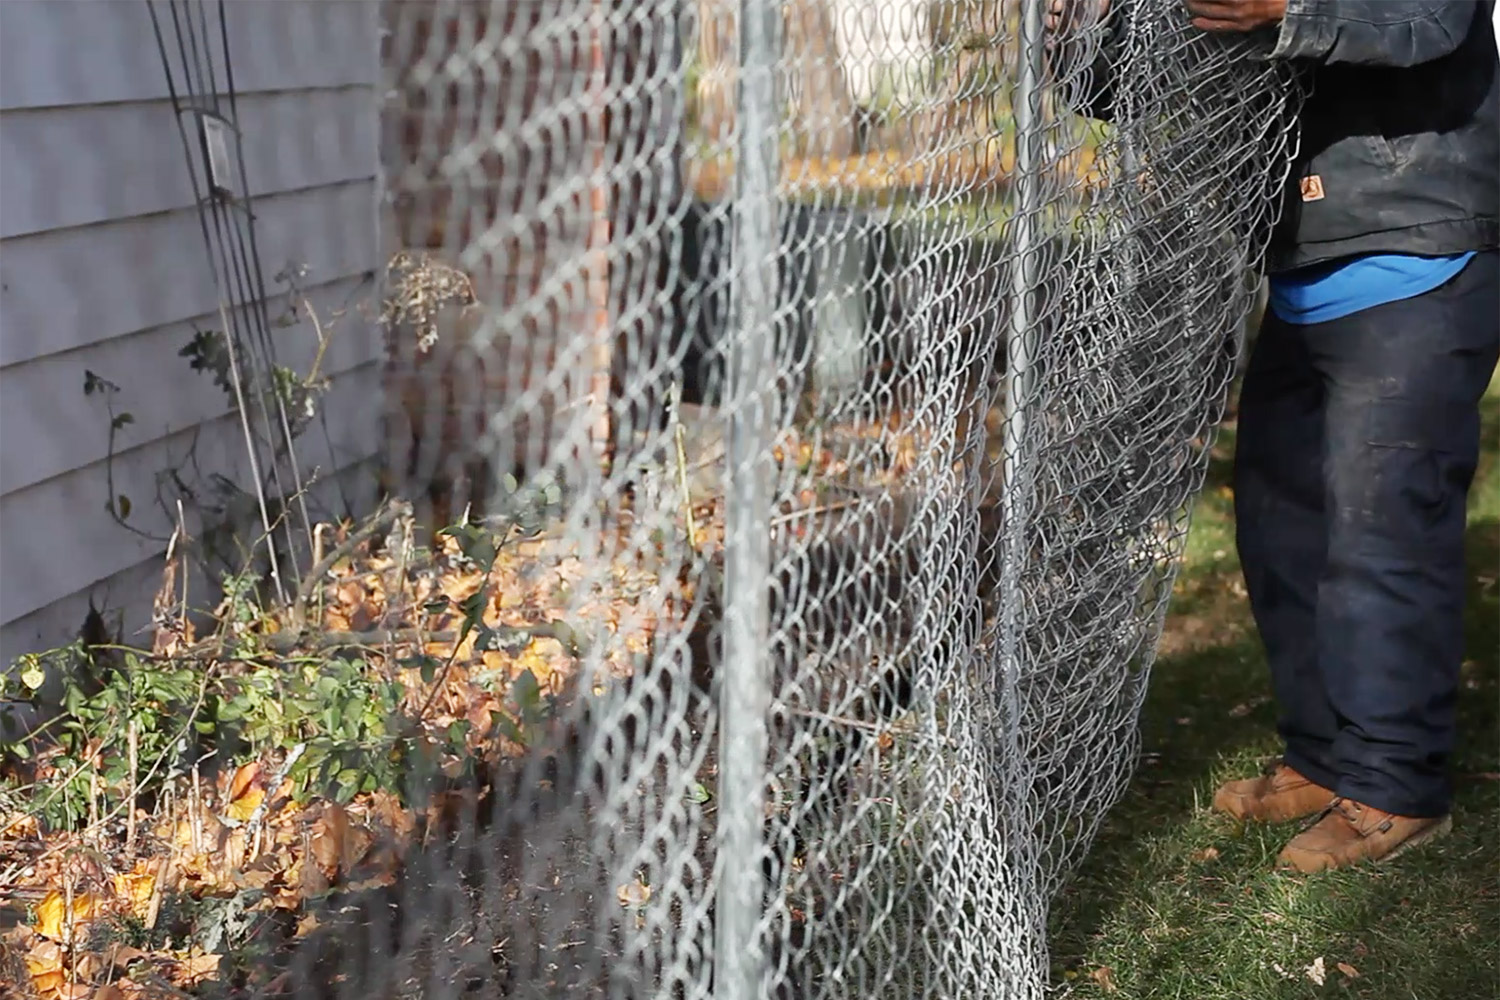 Unroll construction chain link fence